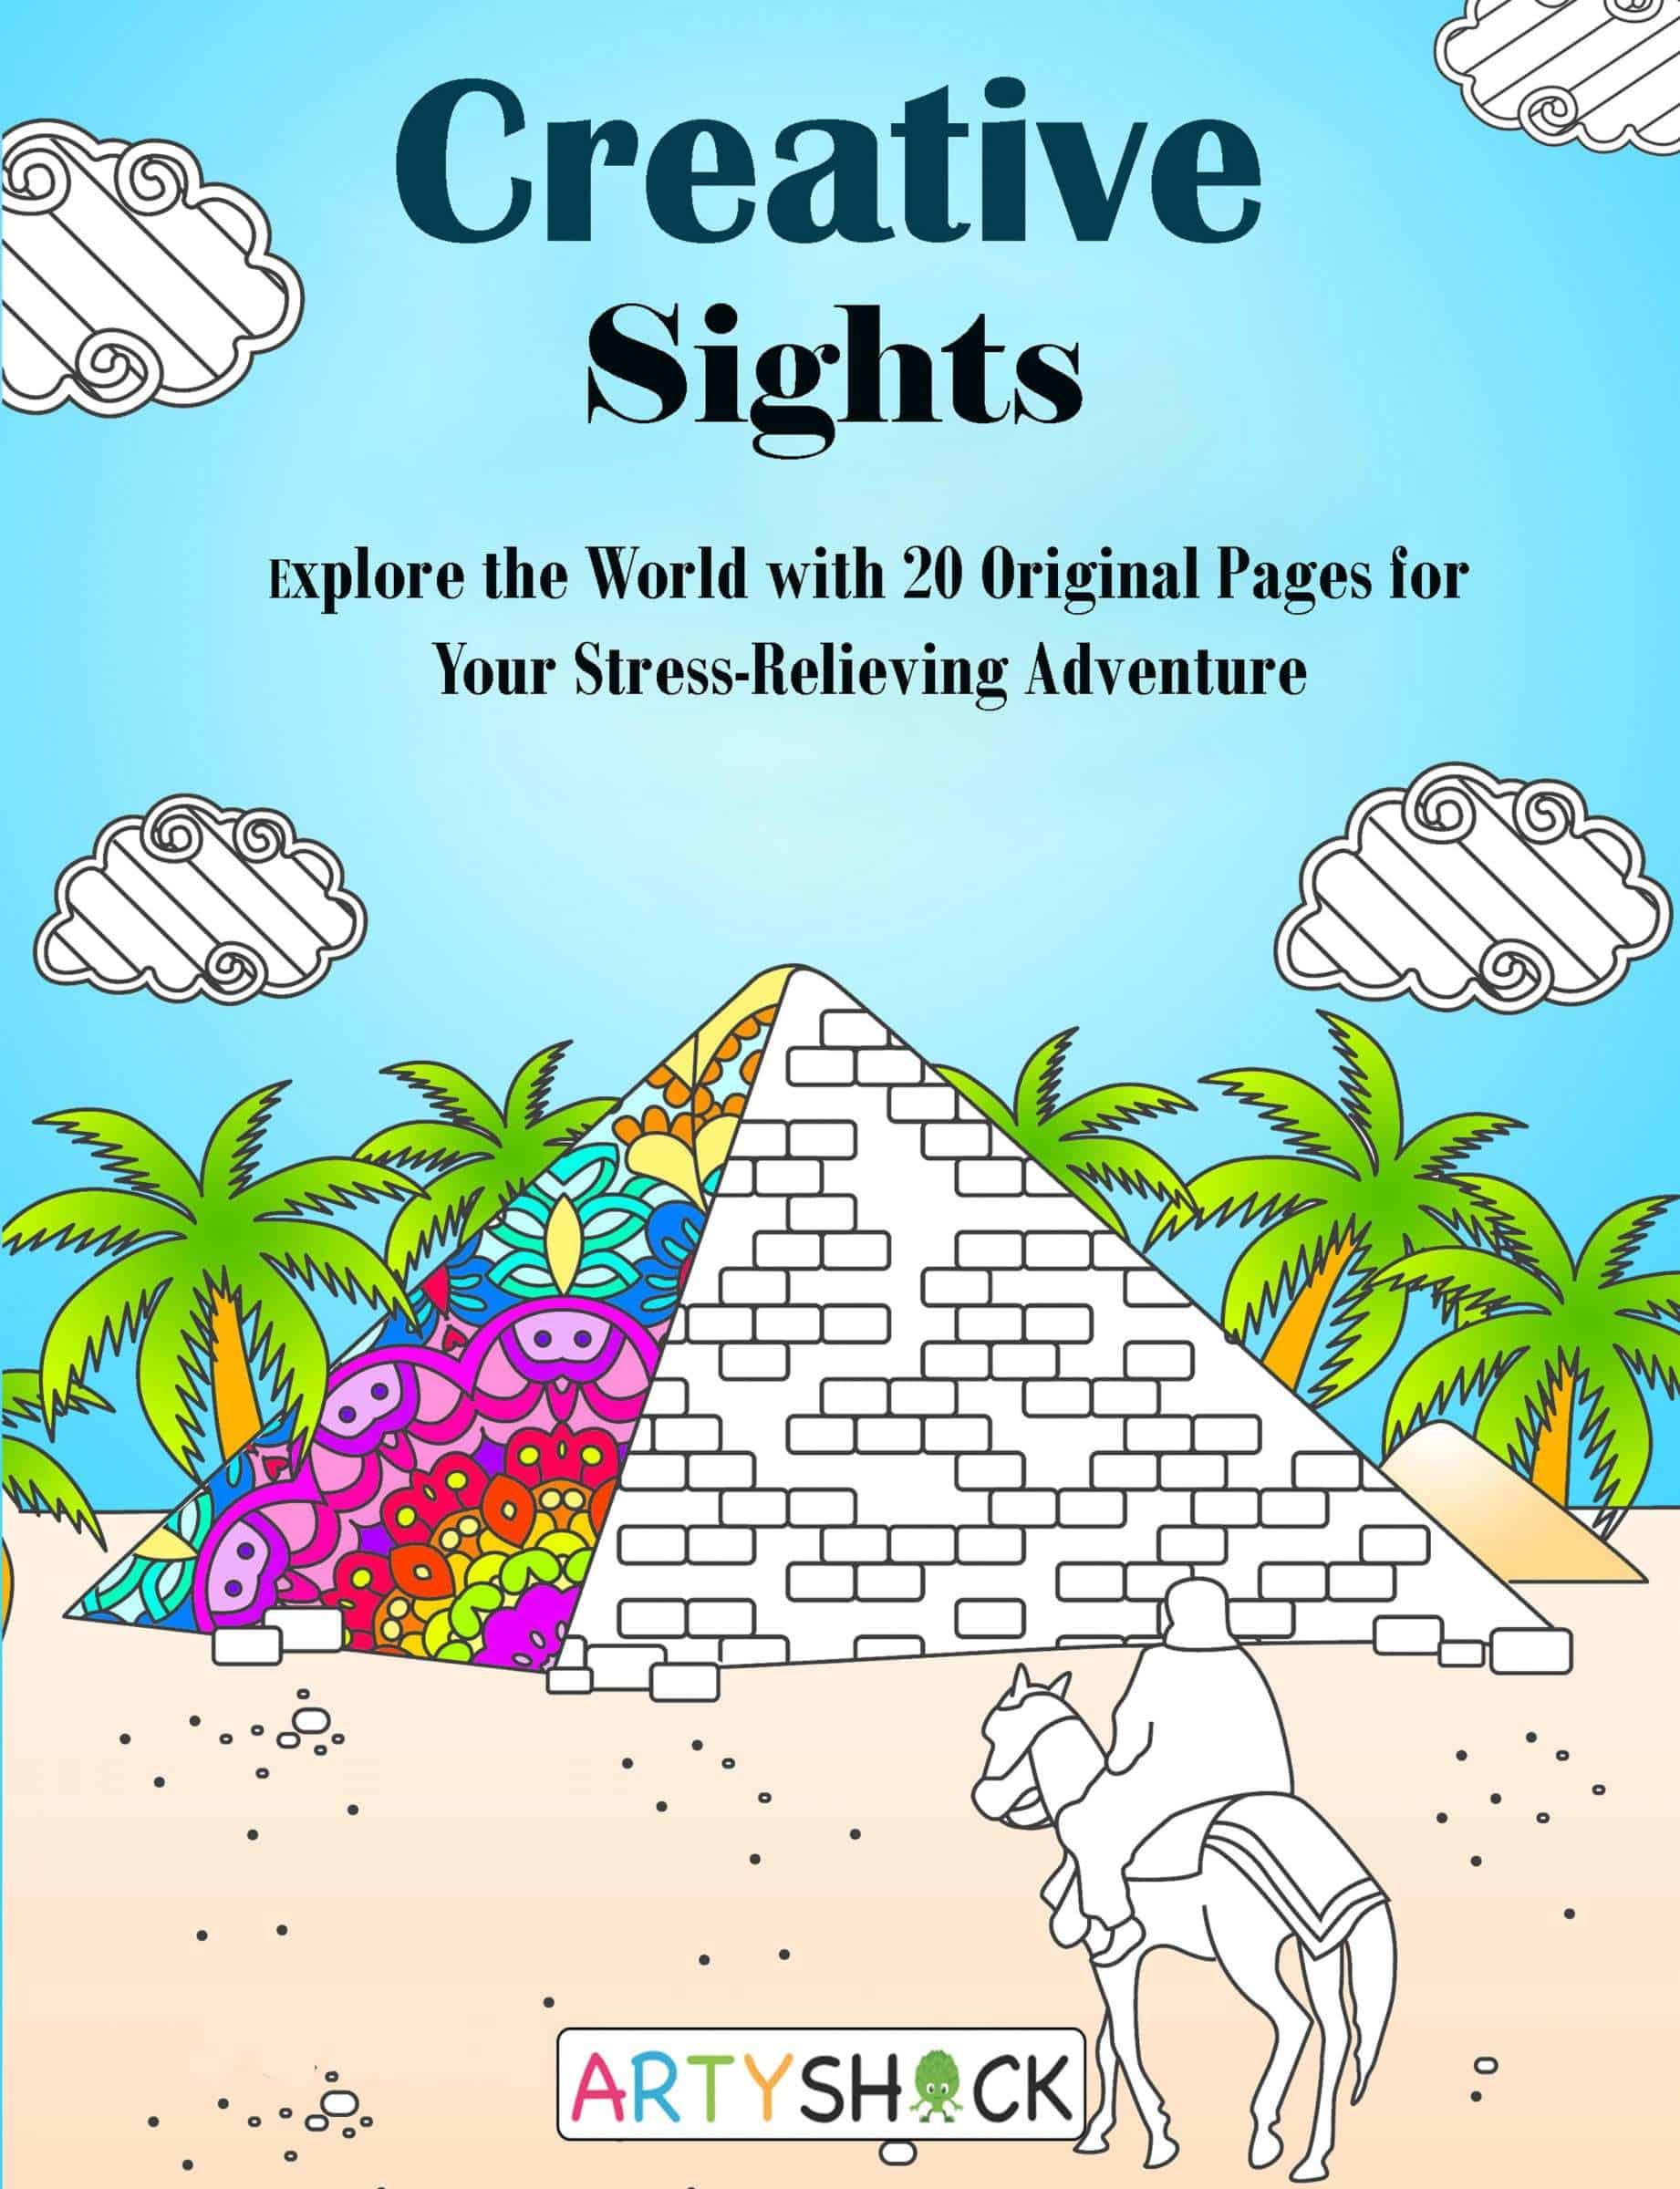 Creative Sights: Explore the World with Original Pages for Your Stress-Relieving Adventure